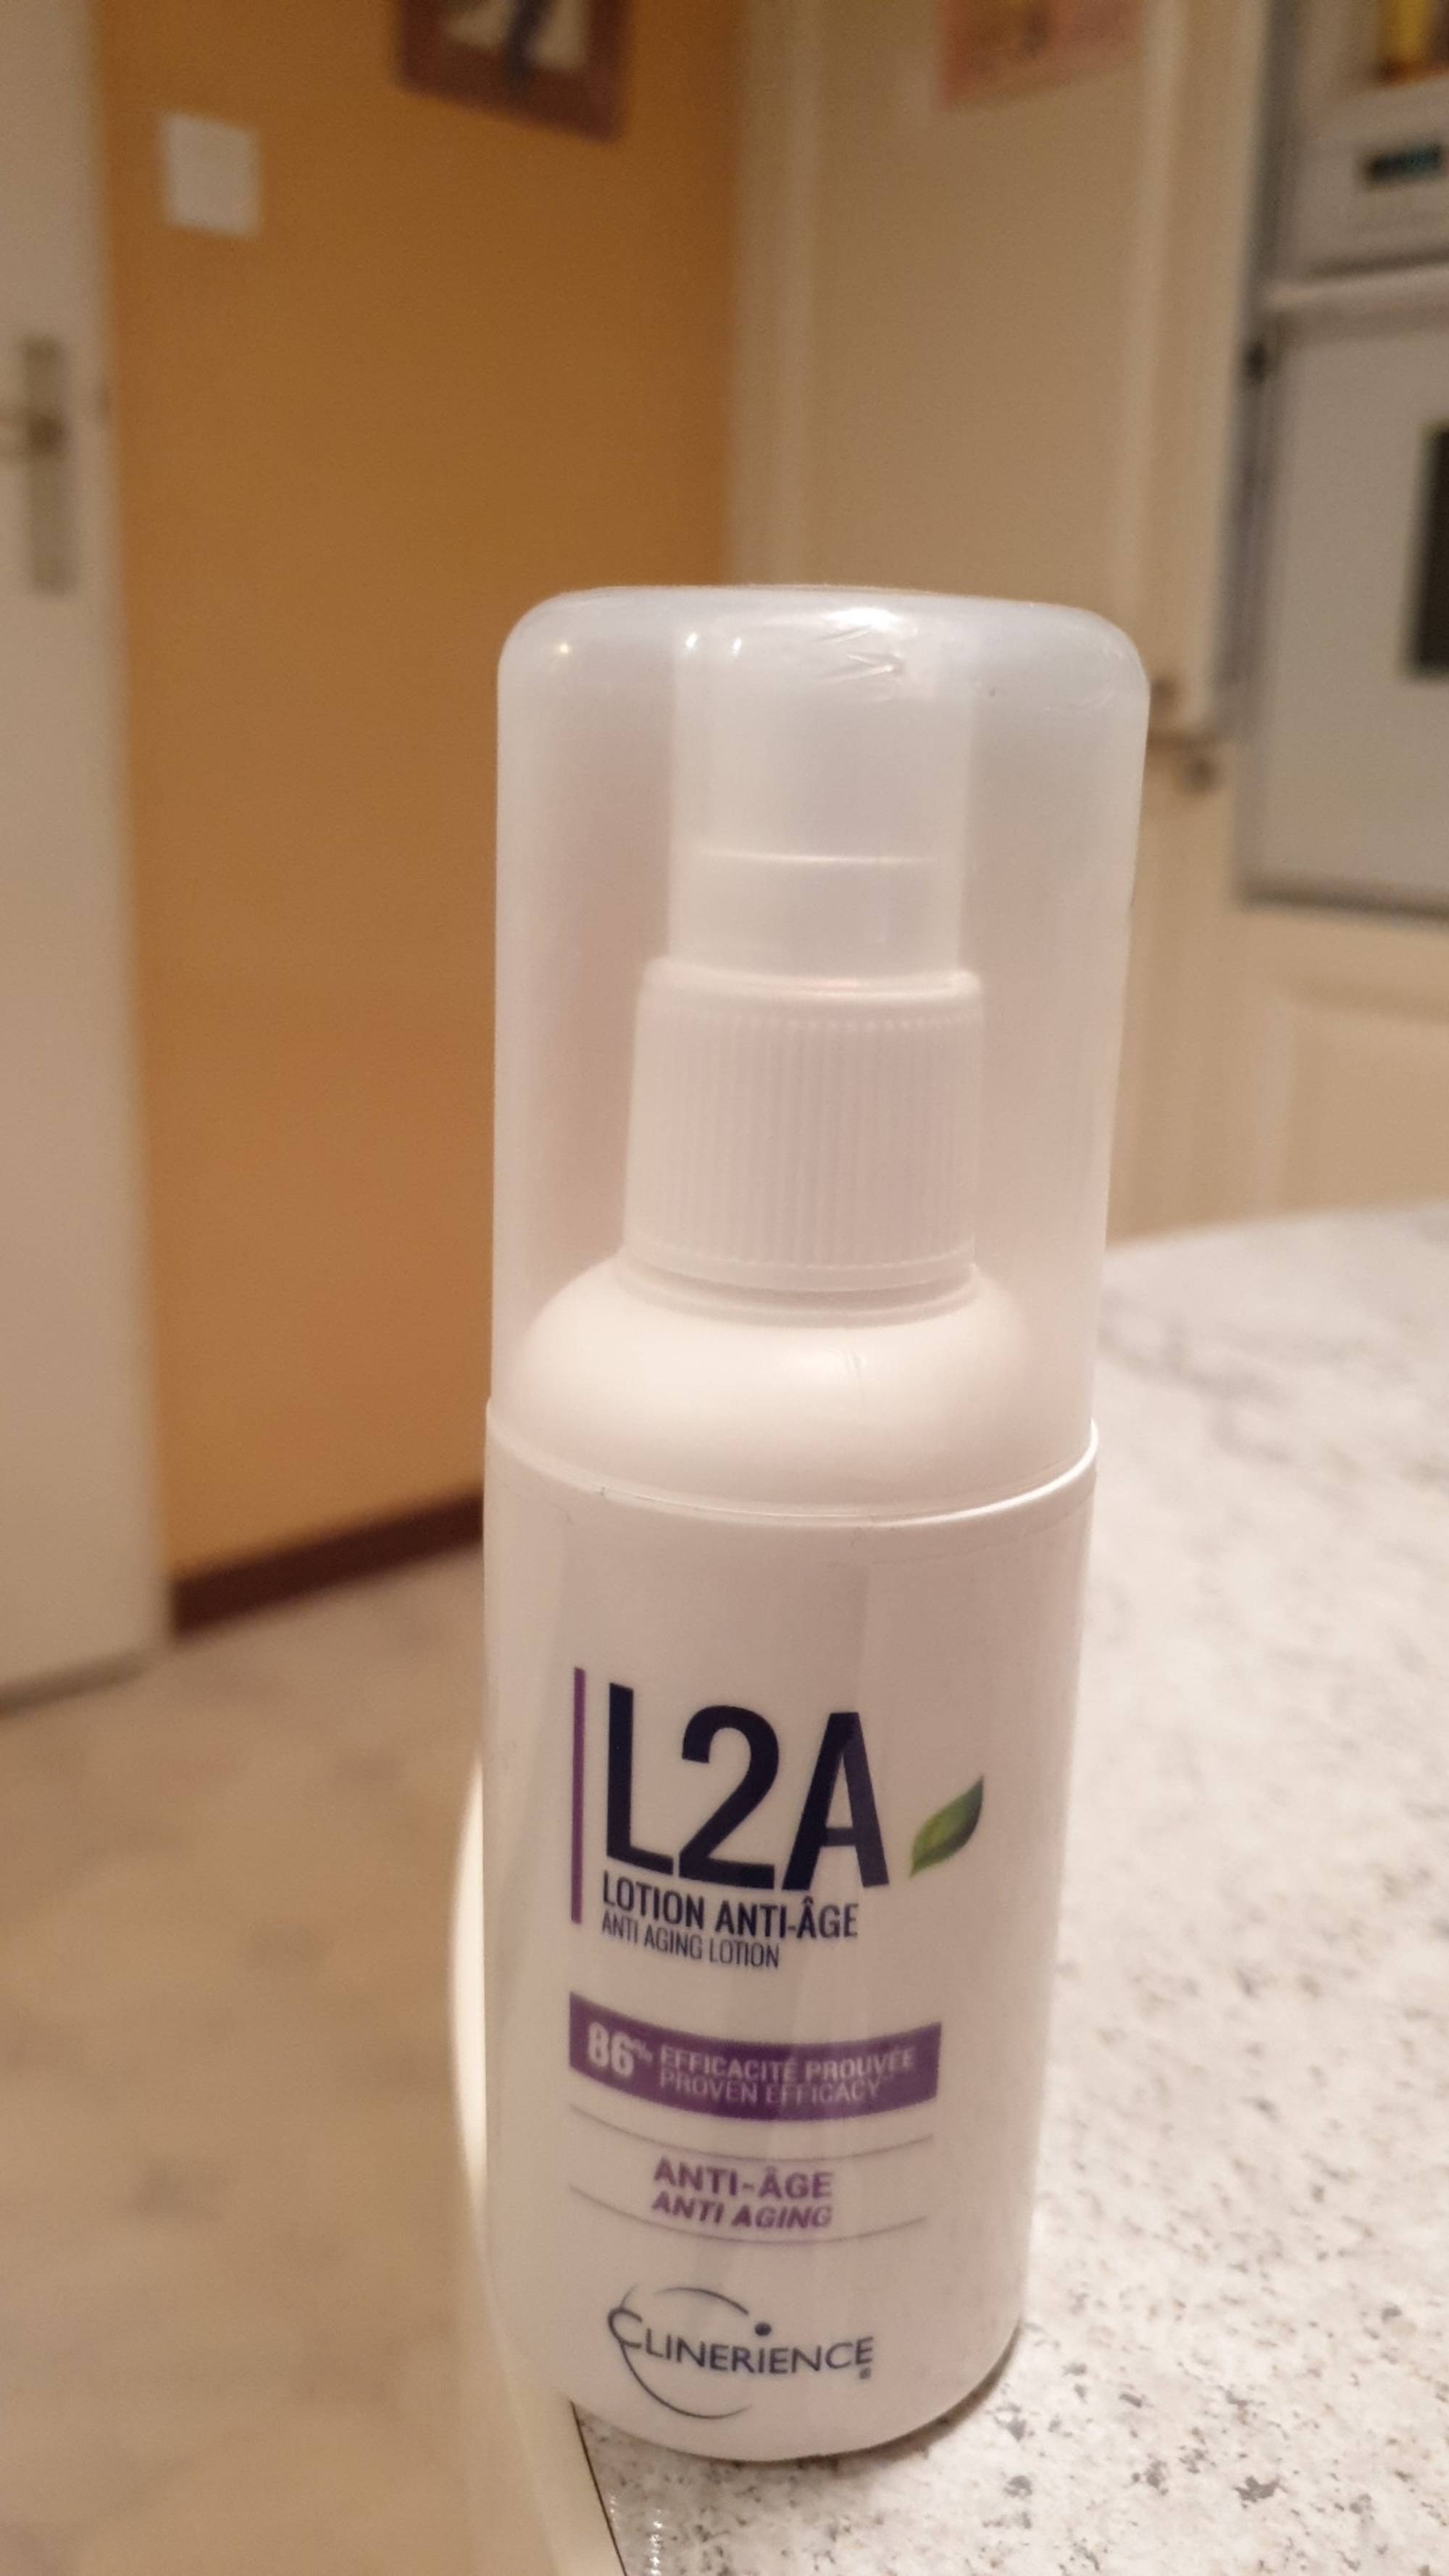 CLINERIENCE - L2A - Lotion anti-âge